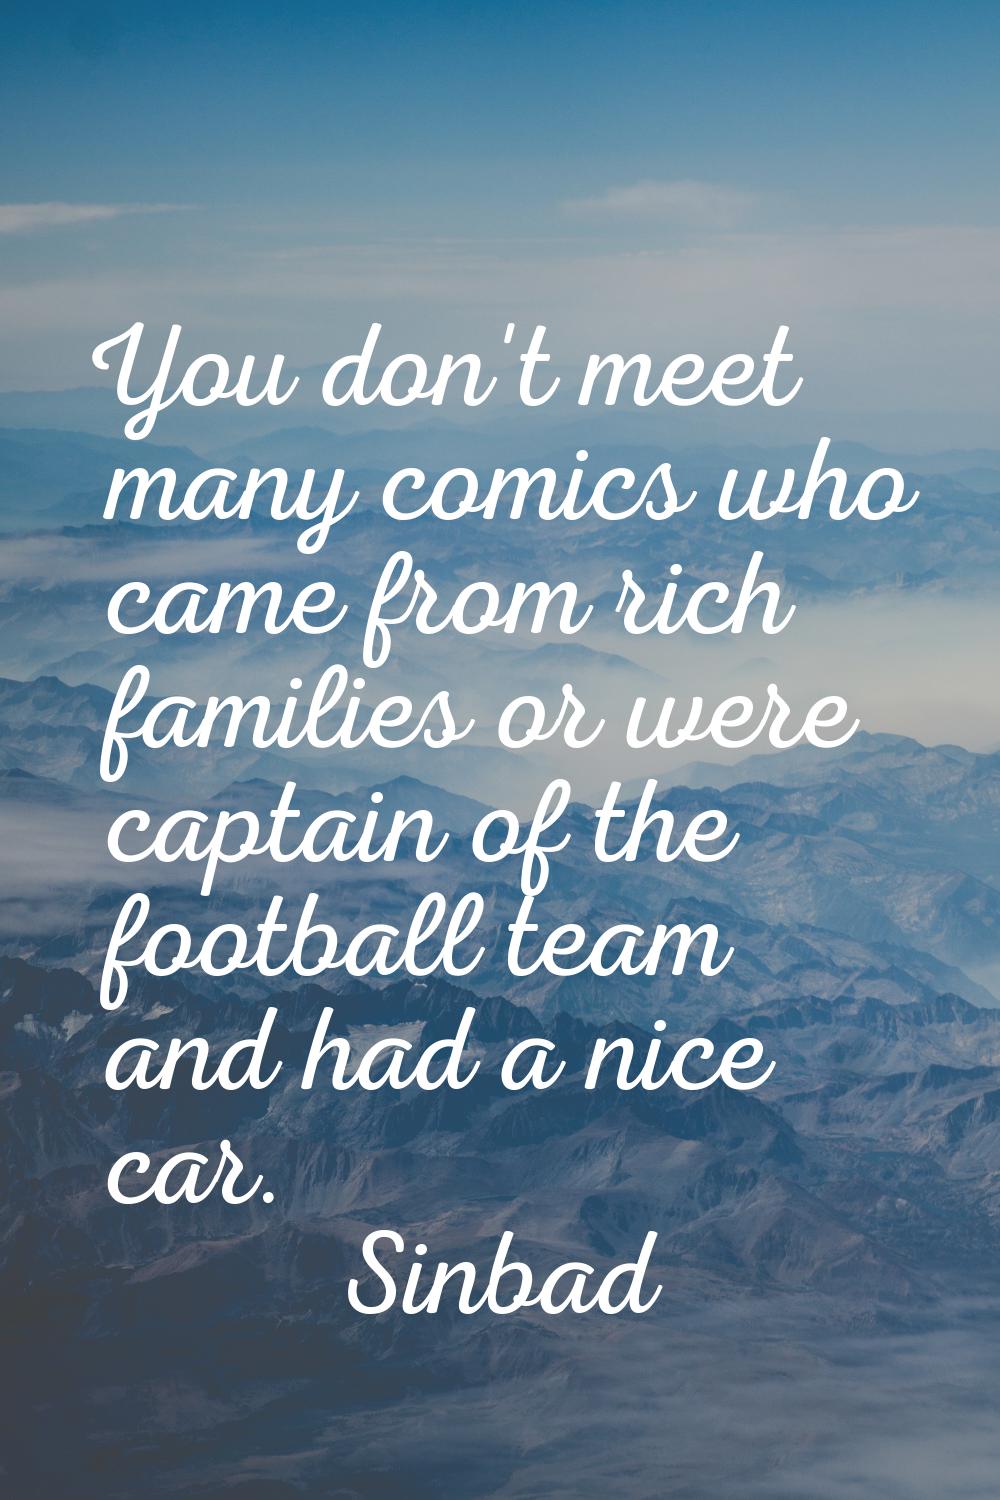 You don't meet many comics who came from rich families or were captain of the football team and had